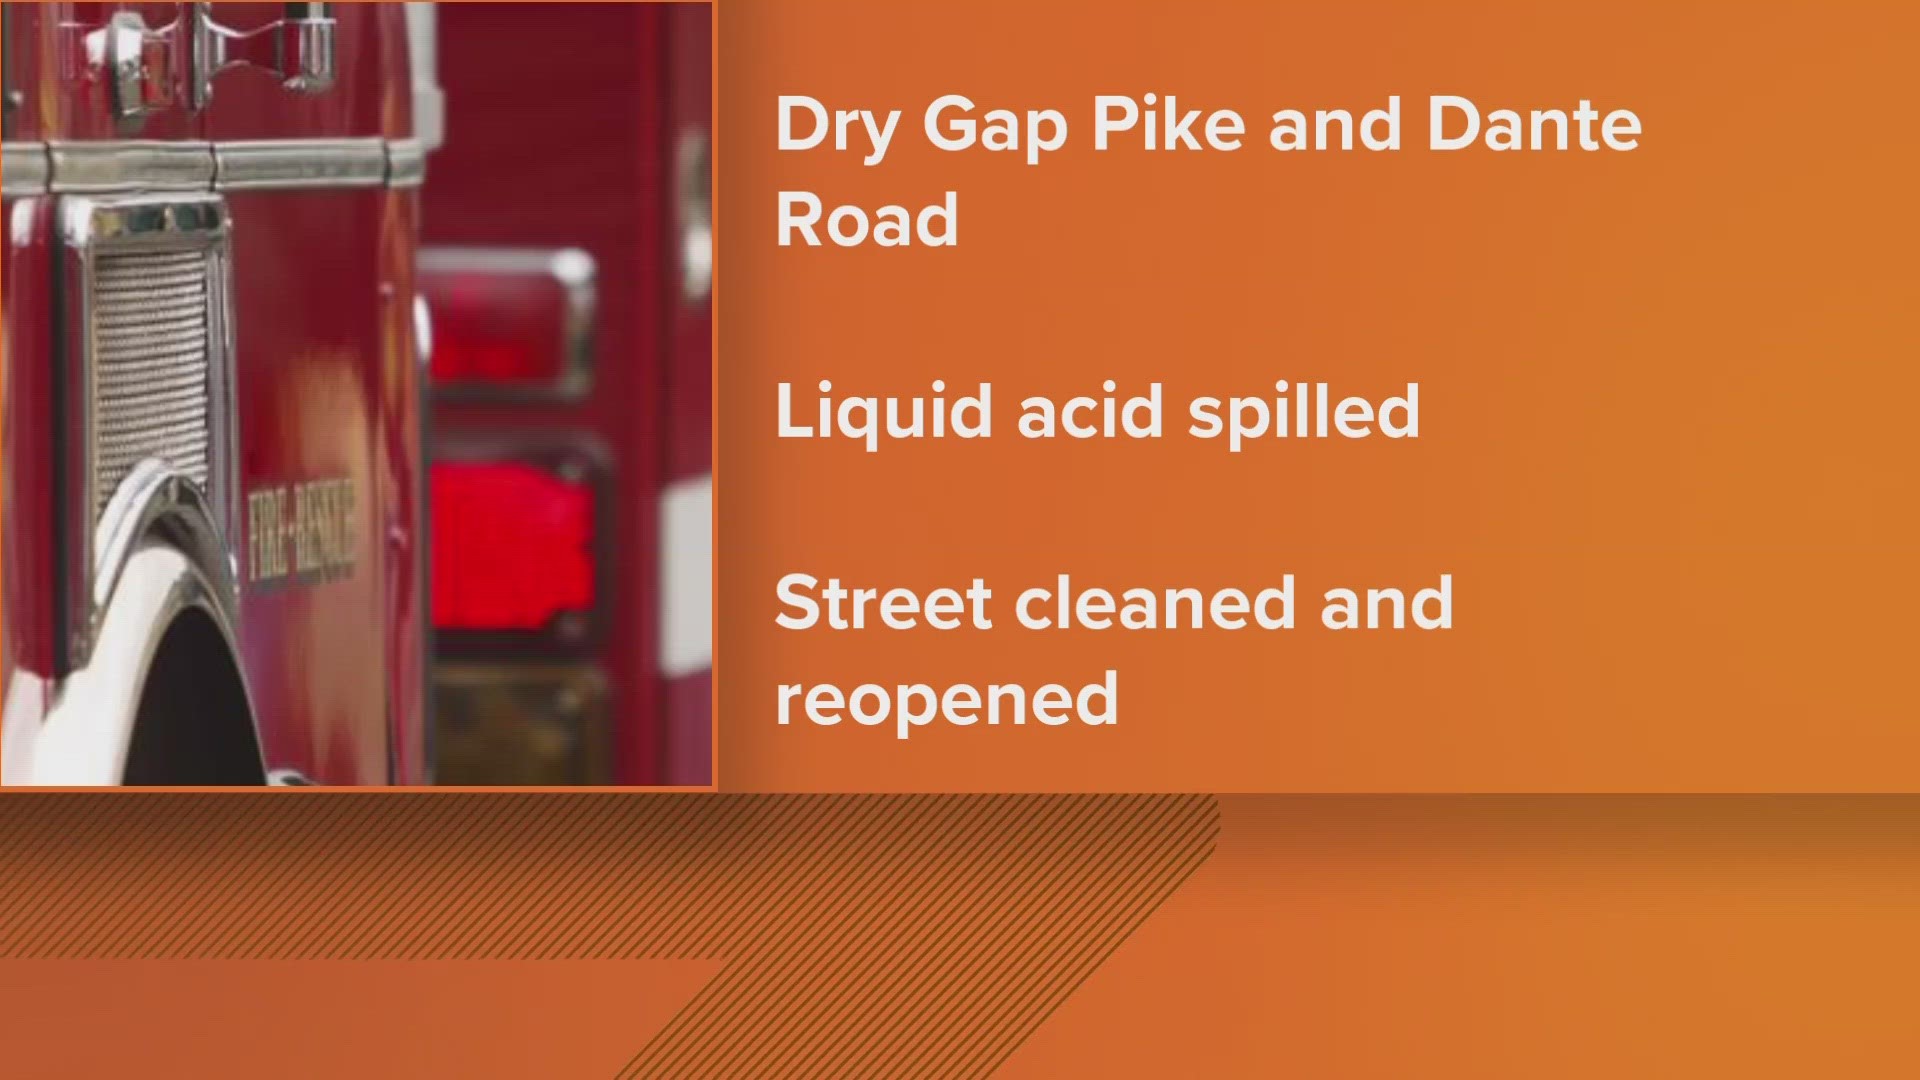 The spill happened around 9:15 p.m. on Dry Gap Pike and Dante Road.